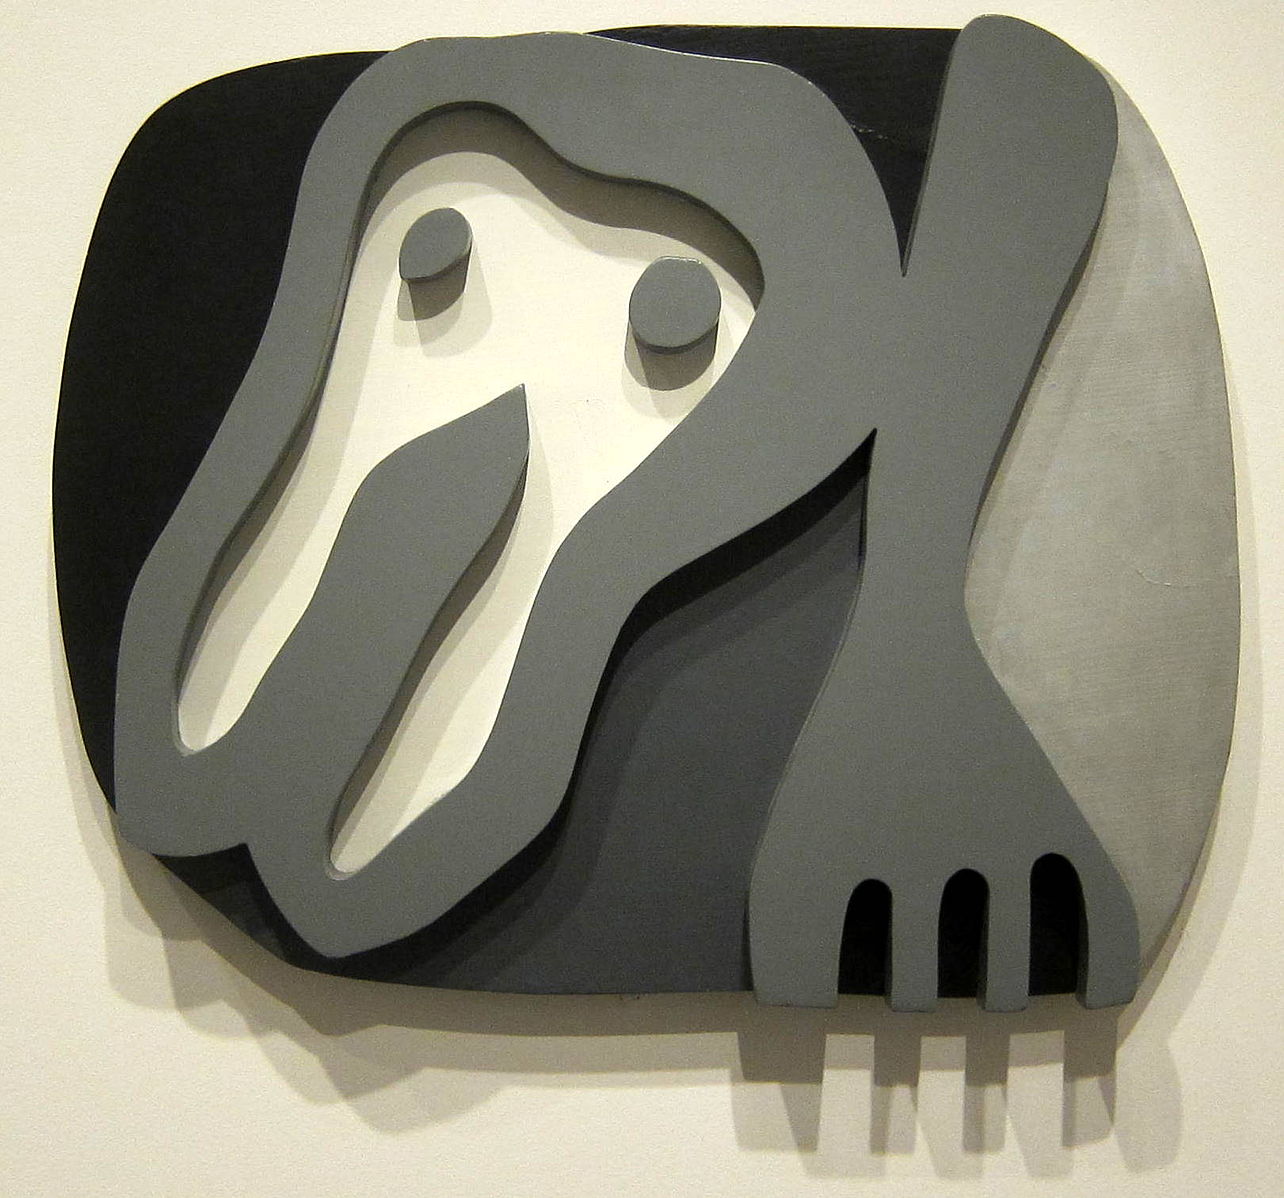 A black and white tooth and fork